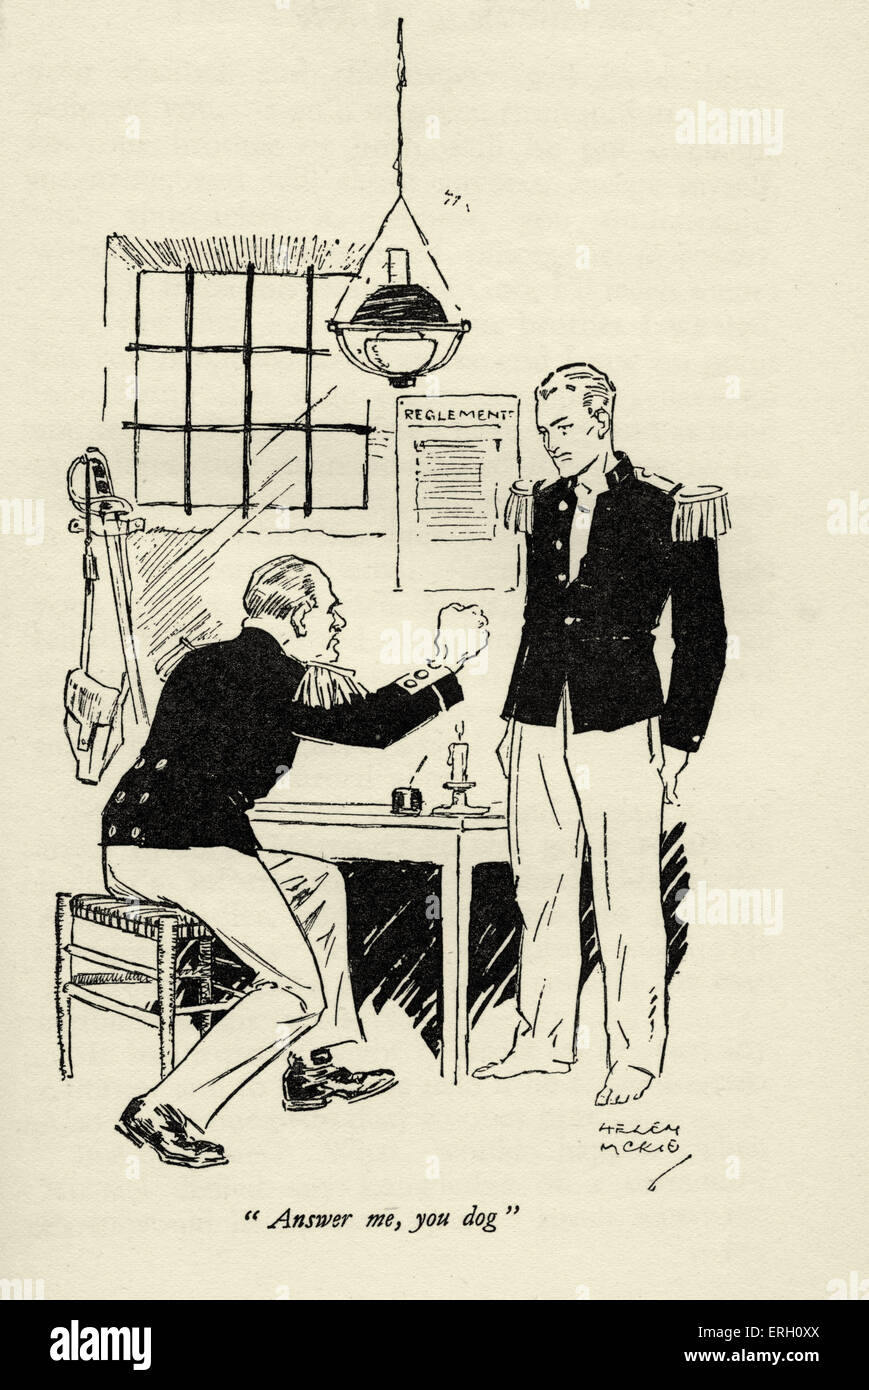 Beau Geste by P.C. Wren. First published in 1924. Caption: Answer me, you dog! Illustration by Helen Mckie. British author, Stock Photo